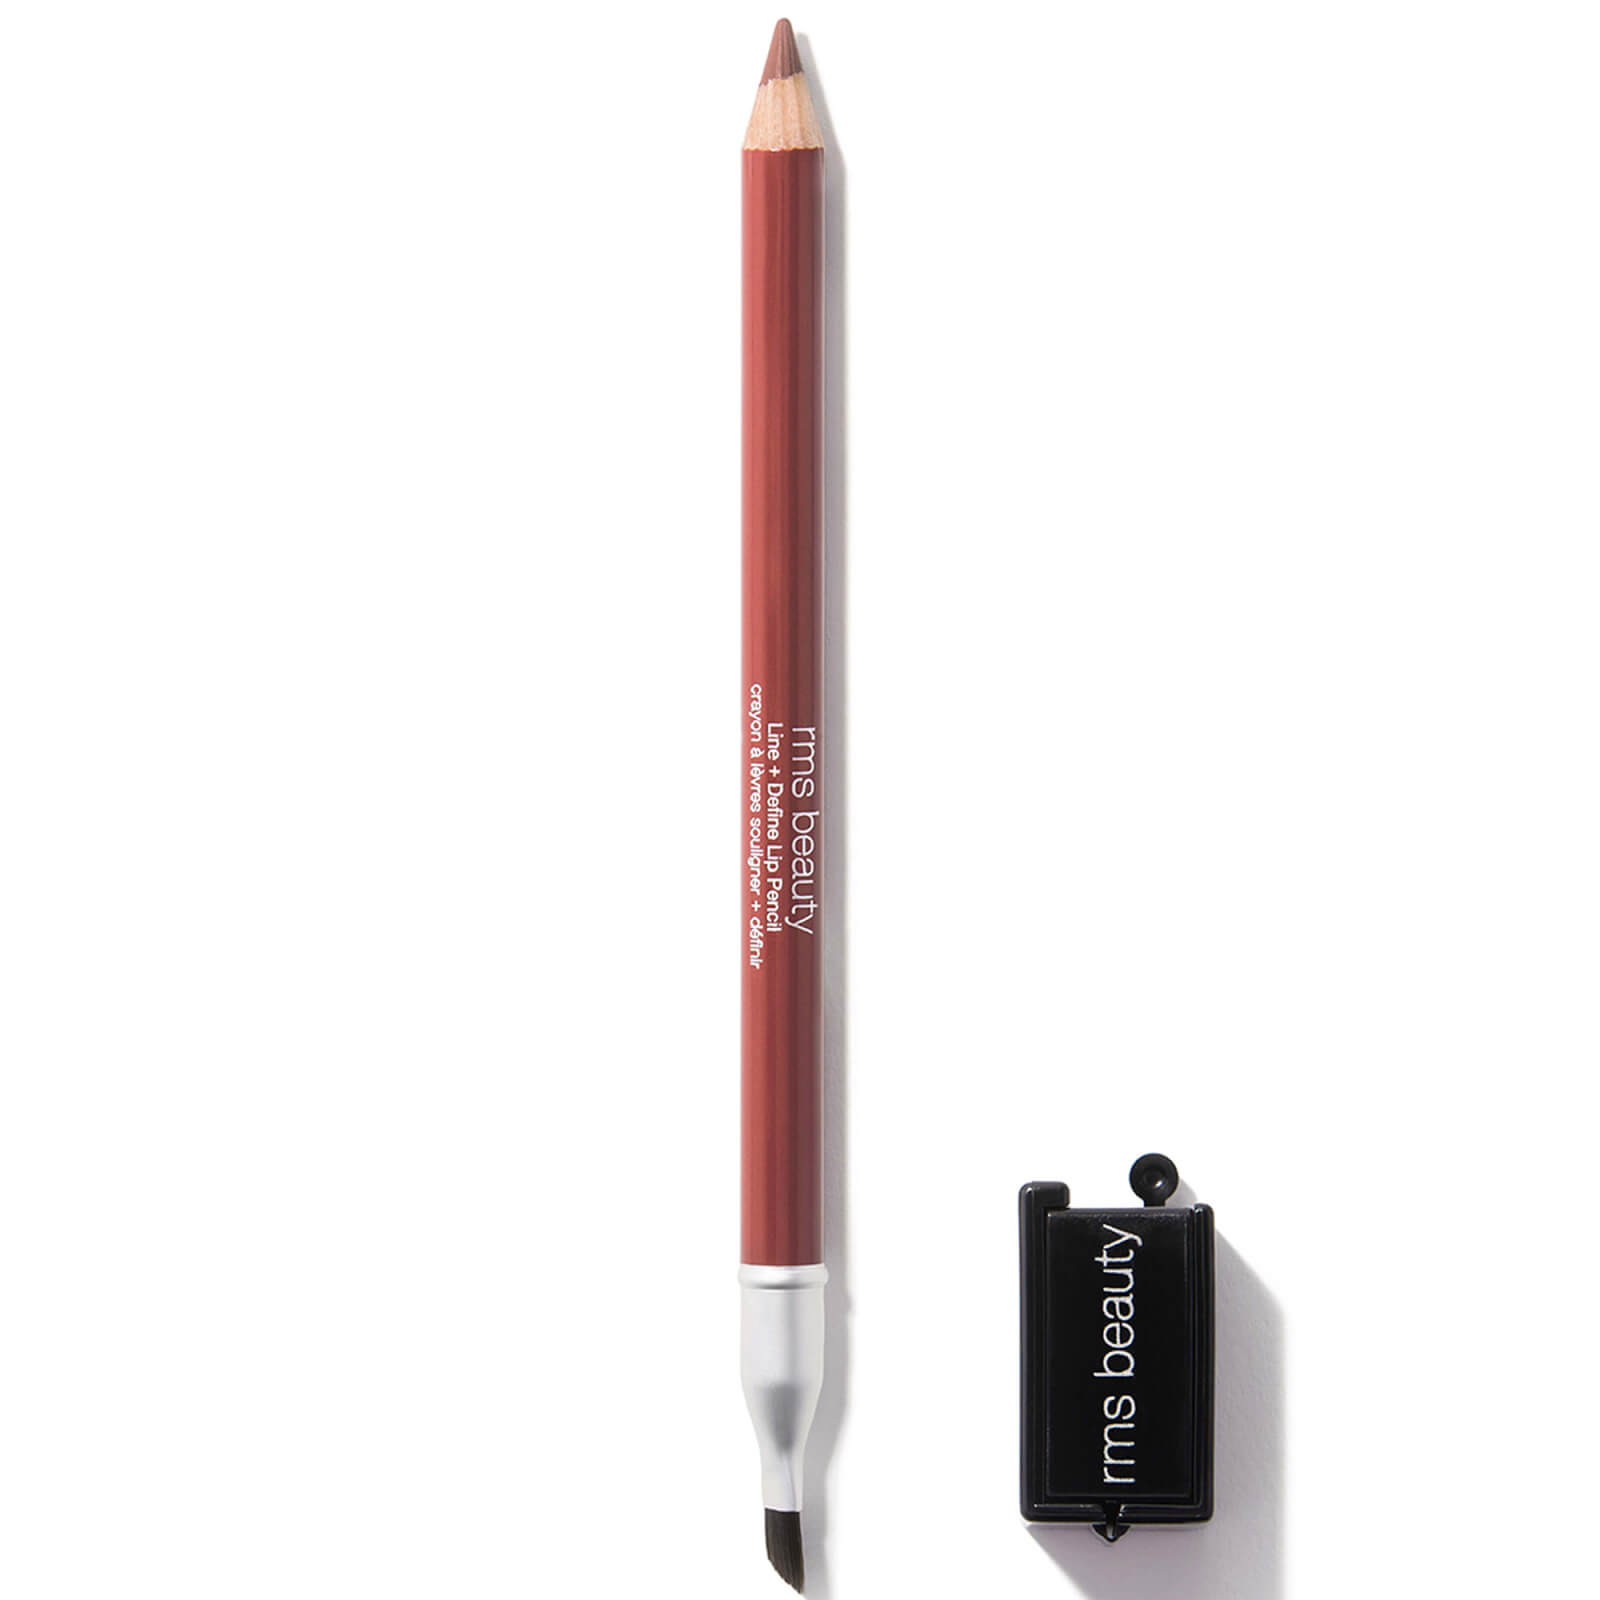 Rms Beauty Go Nude Lip Pencil 1.08g (various Shades) In Nighttime Nude